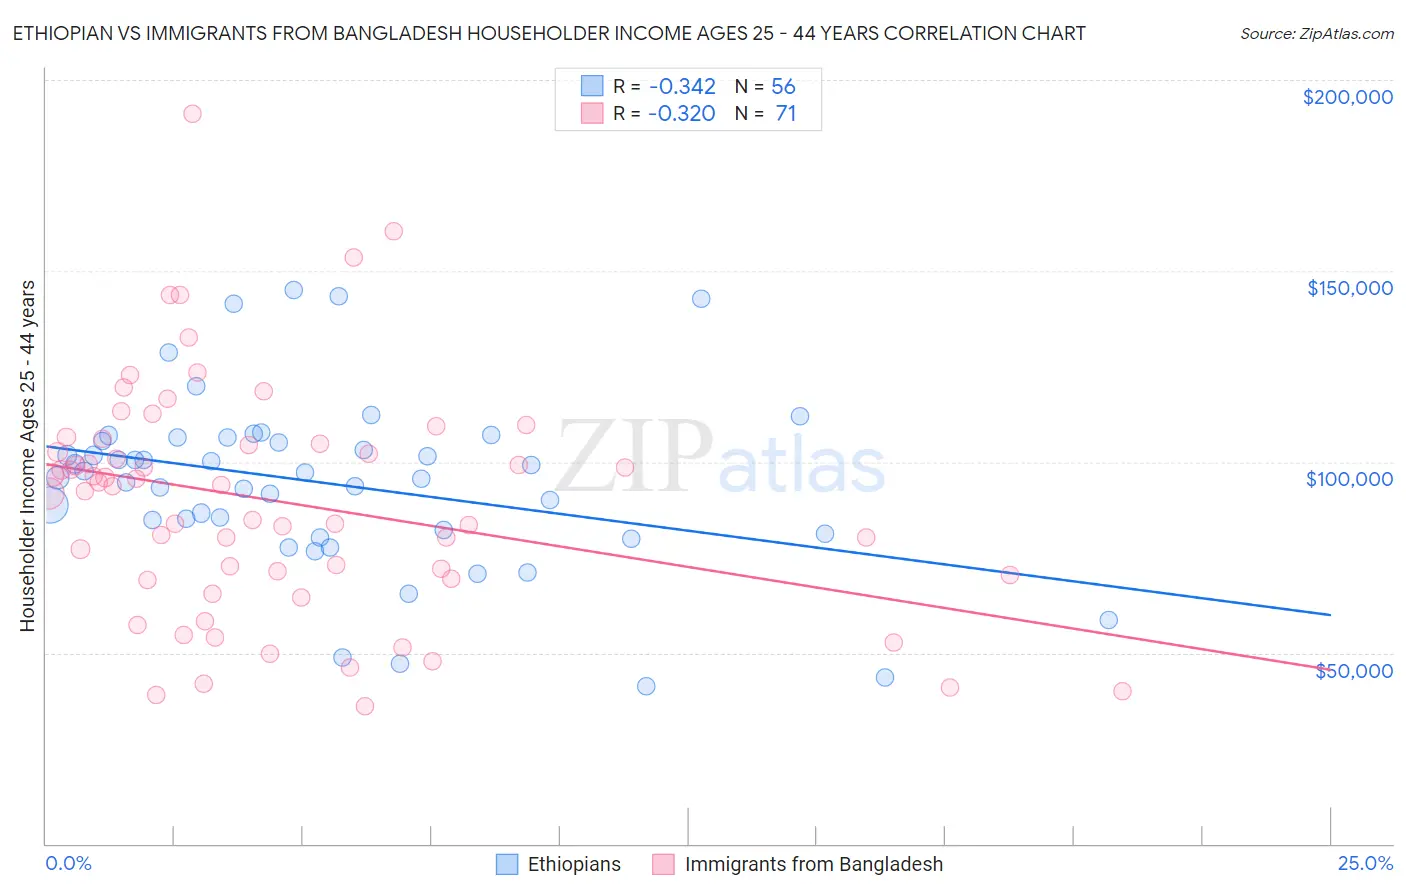 Ethiopian vs Immigrants from Bangladesh Householder Income Ages 25 - 44 years